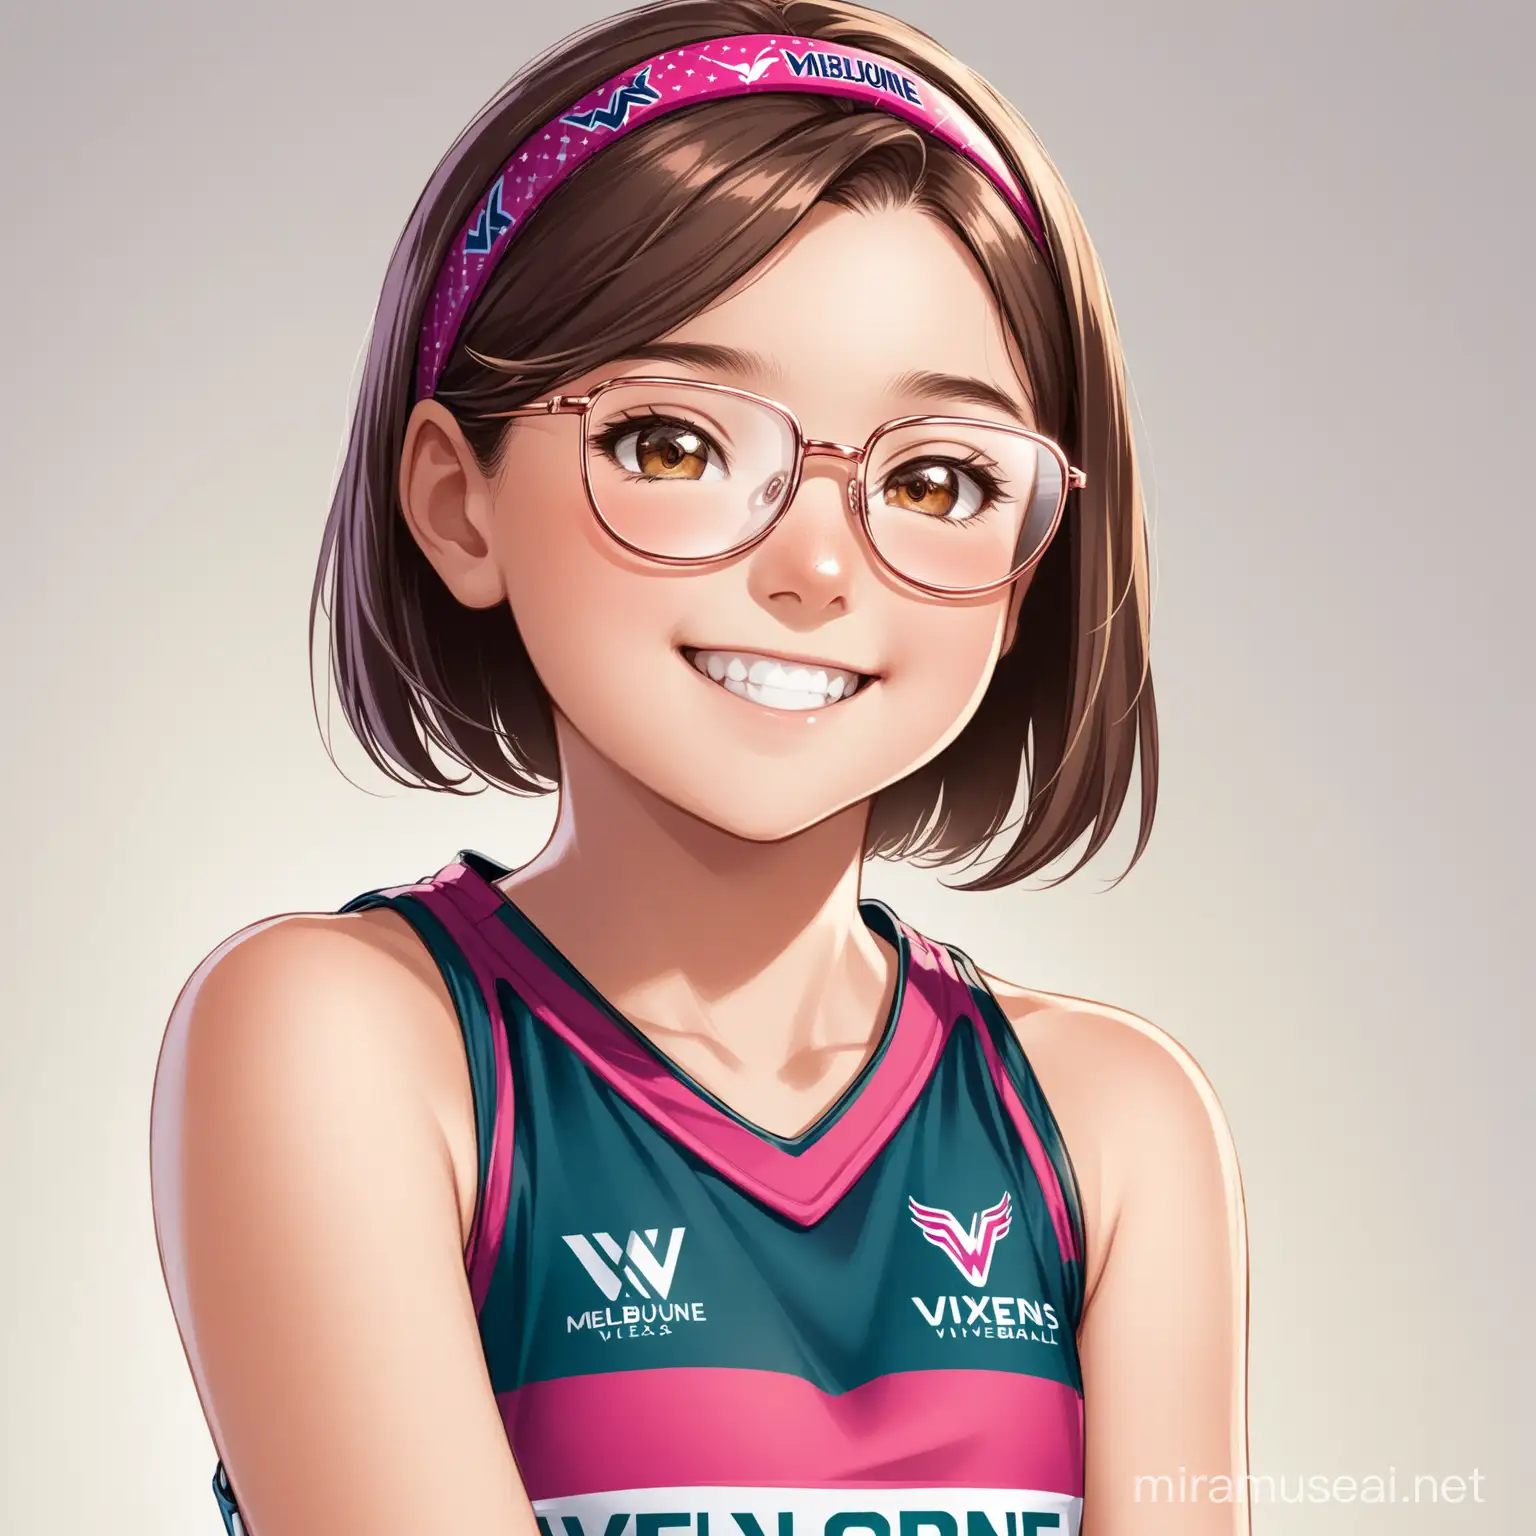 12 year old girl with short brown hair, rose gold glasses, brown eyes, smiling, wearing head band, wearing Melbourne vixens netball dress